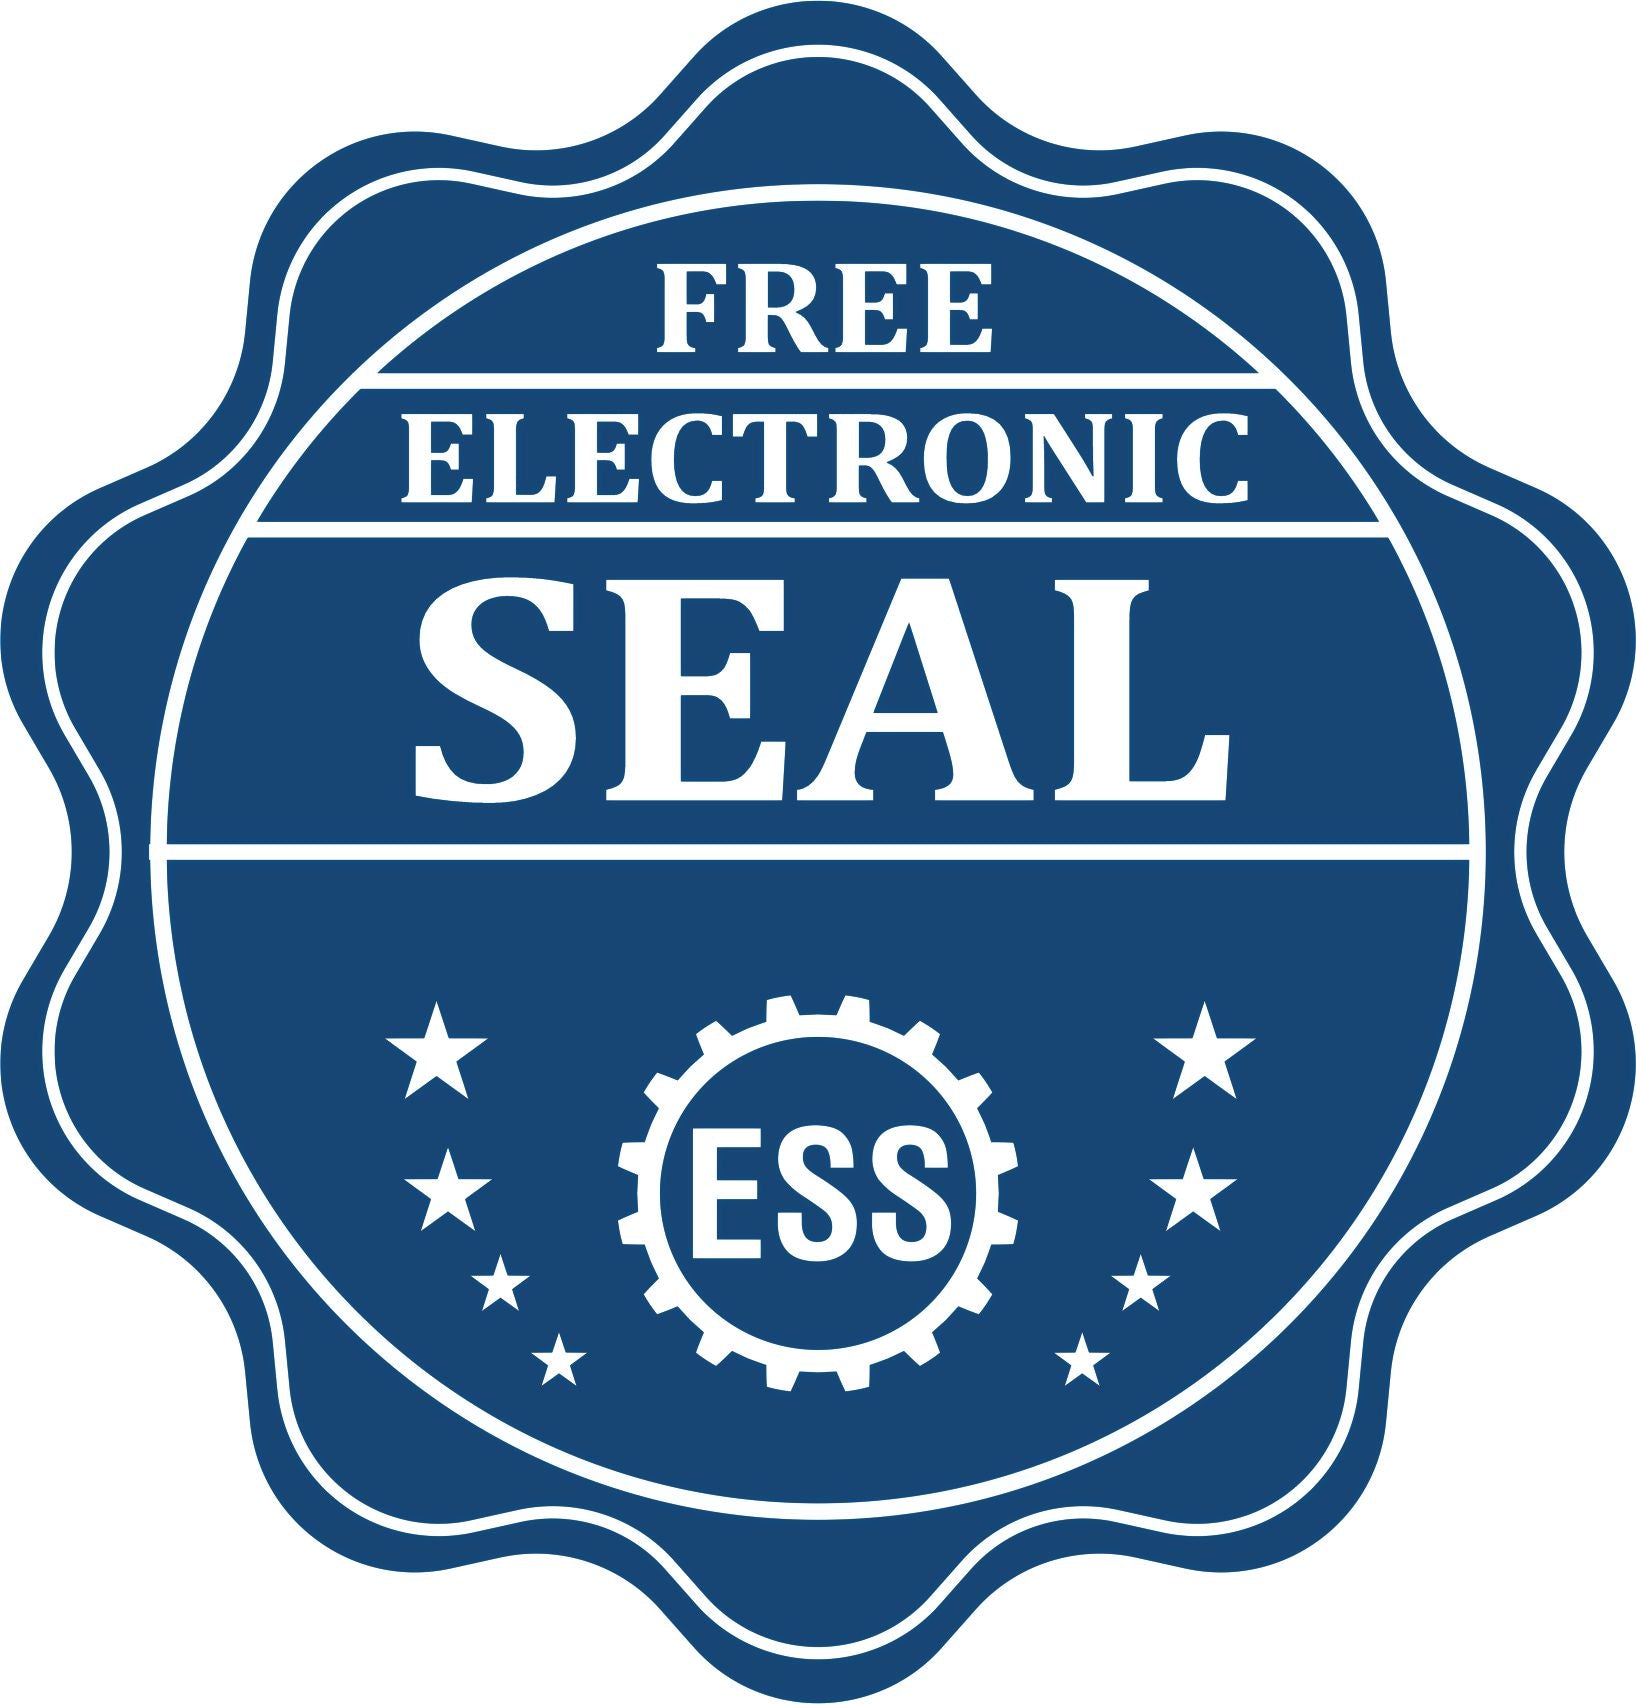 A badge showing a free electronic seal for the Long Reach New York Land Surveyor Seal with stars and the ESS gear on the emblem.